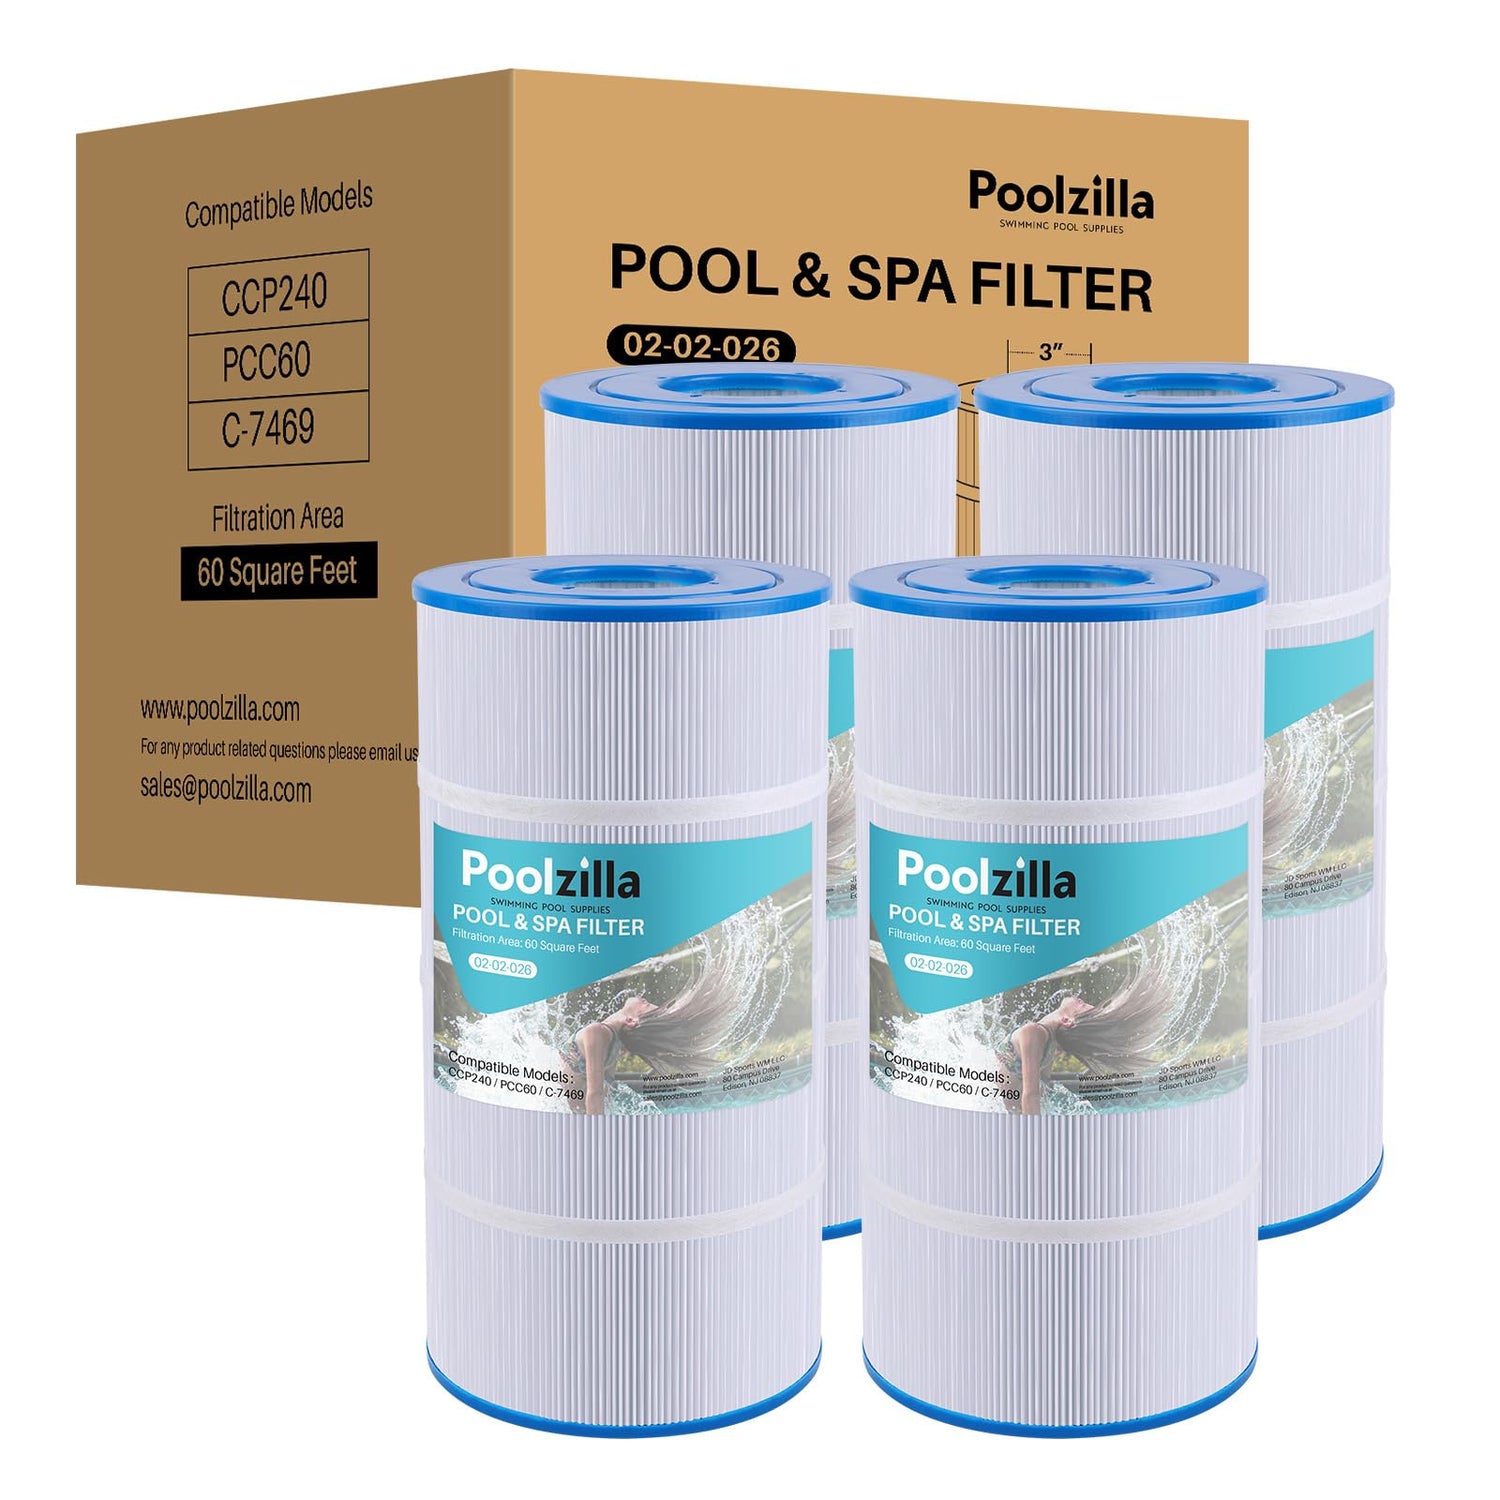 Poolzilla Replacement Pool Filter for PLFPCC60, Pleatco PCC60, Pentair CCP240, R173572, 178569, Unicel C-7469, Filbur FC-1975, Pure N Clean PC-1975, PC-6460